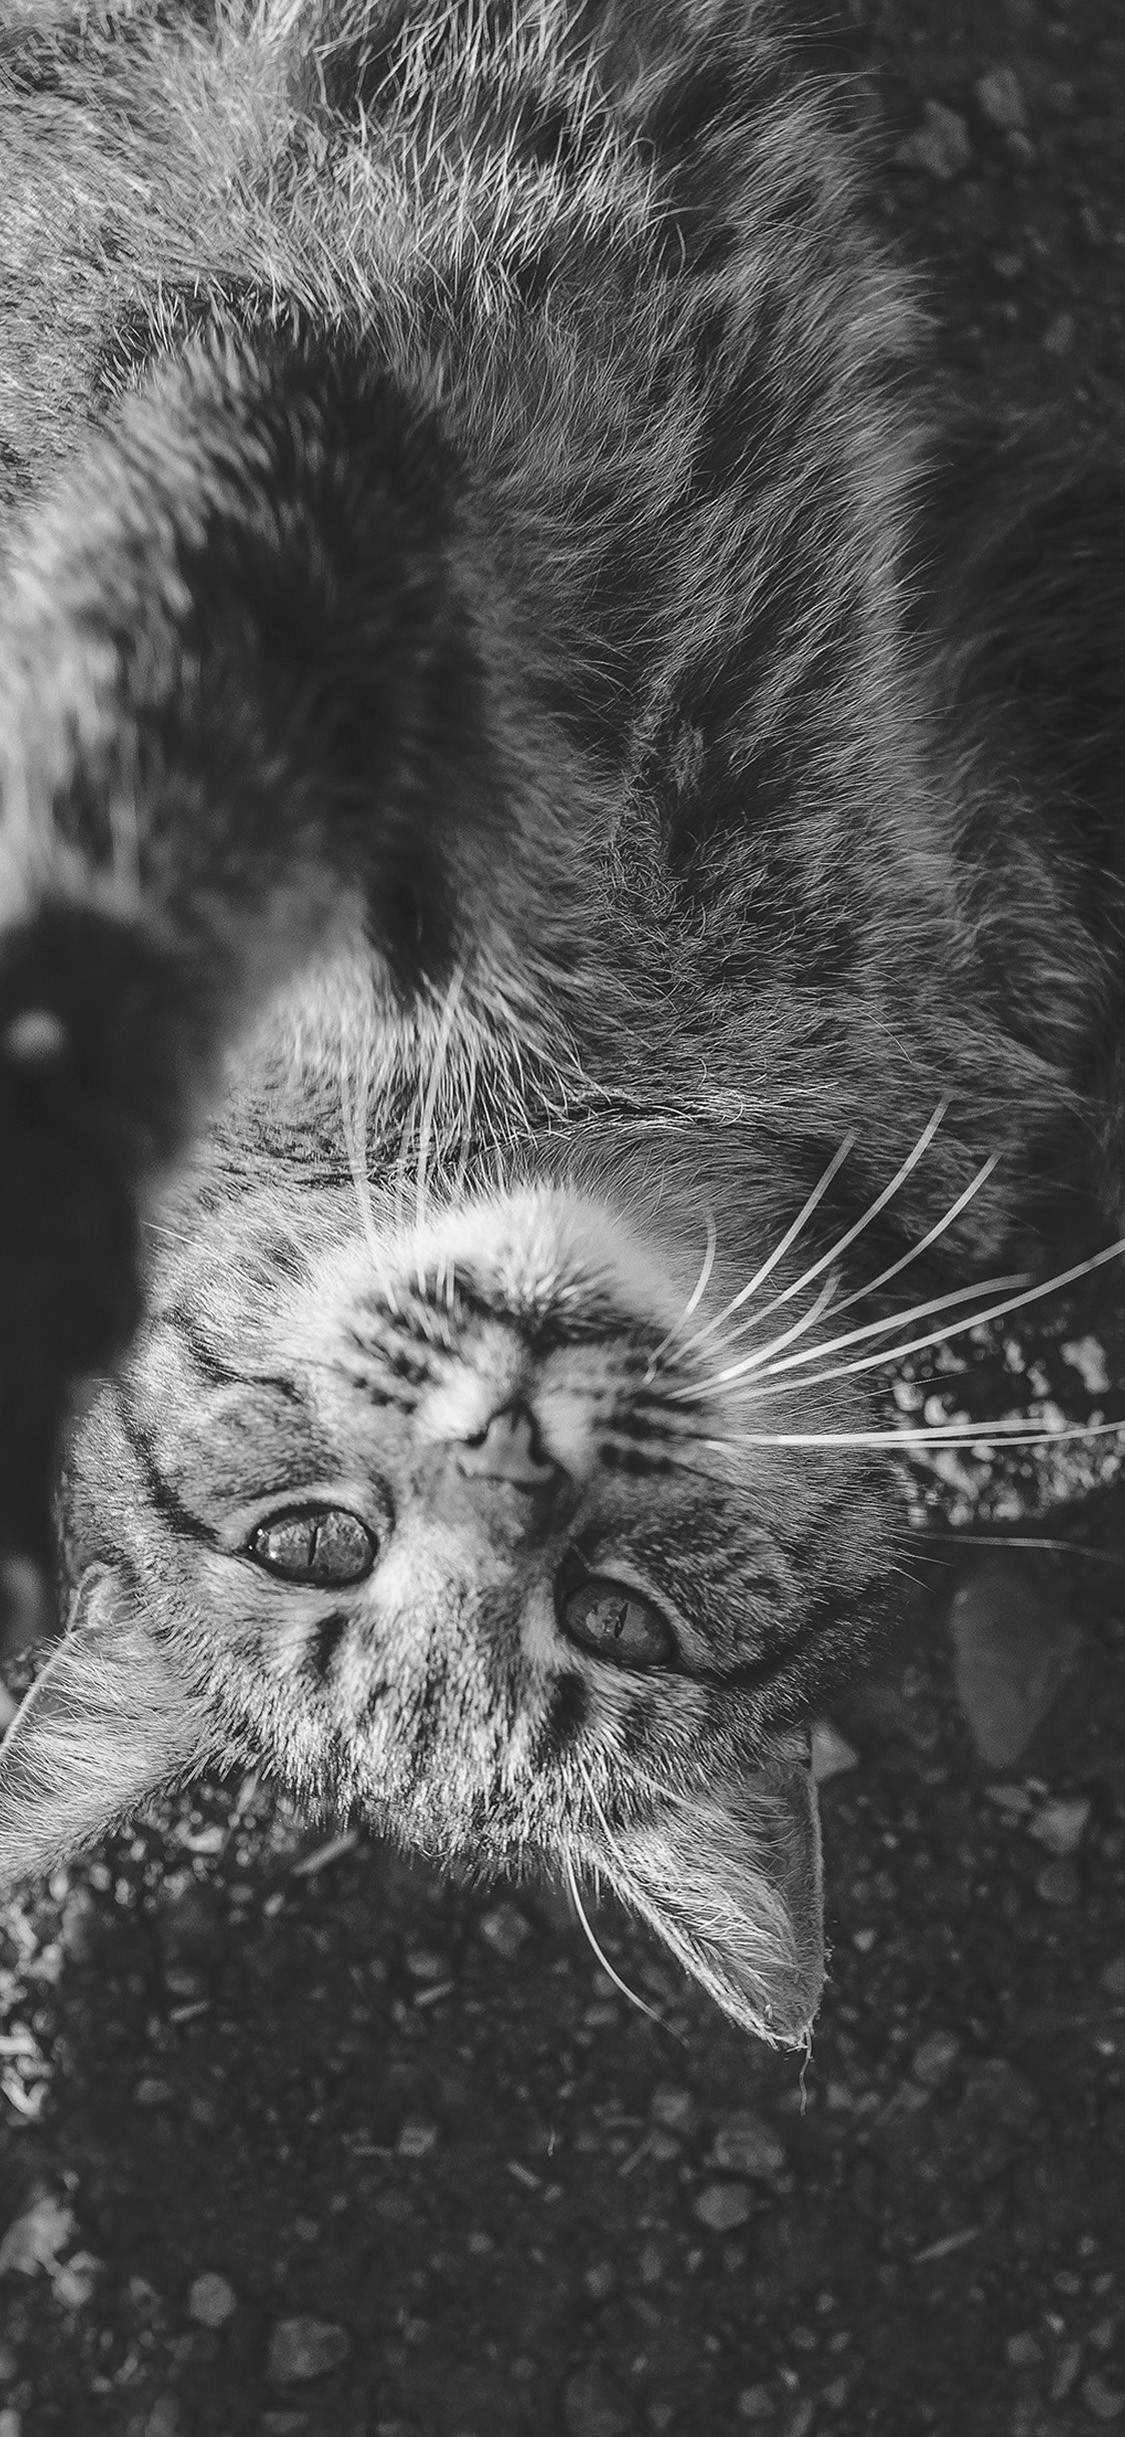 1125x2437 Upside down – cute cat iPhone X2 Wallpapers Download